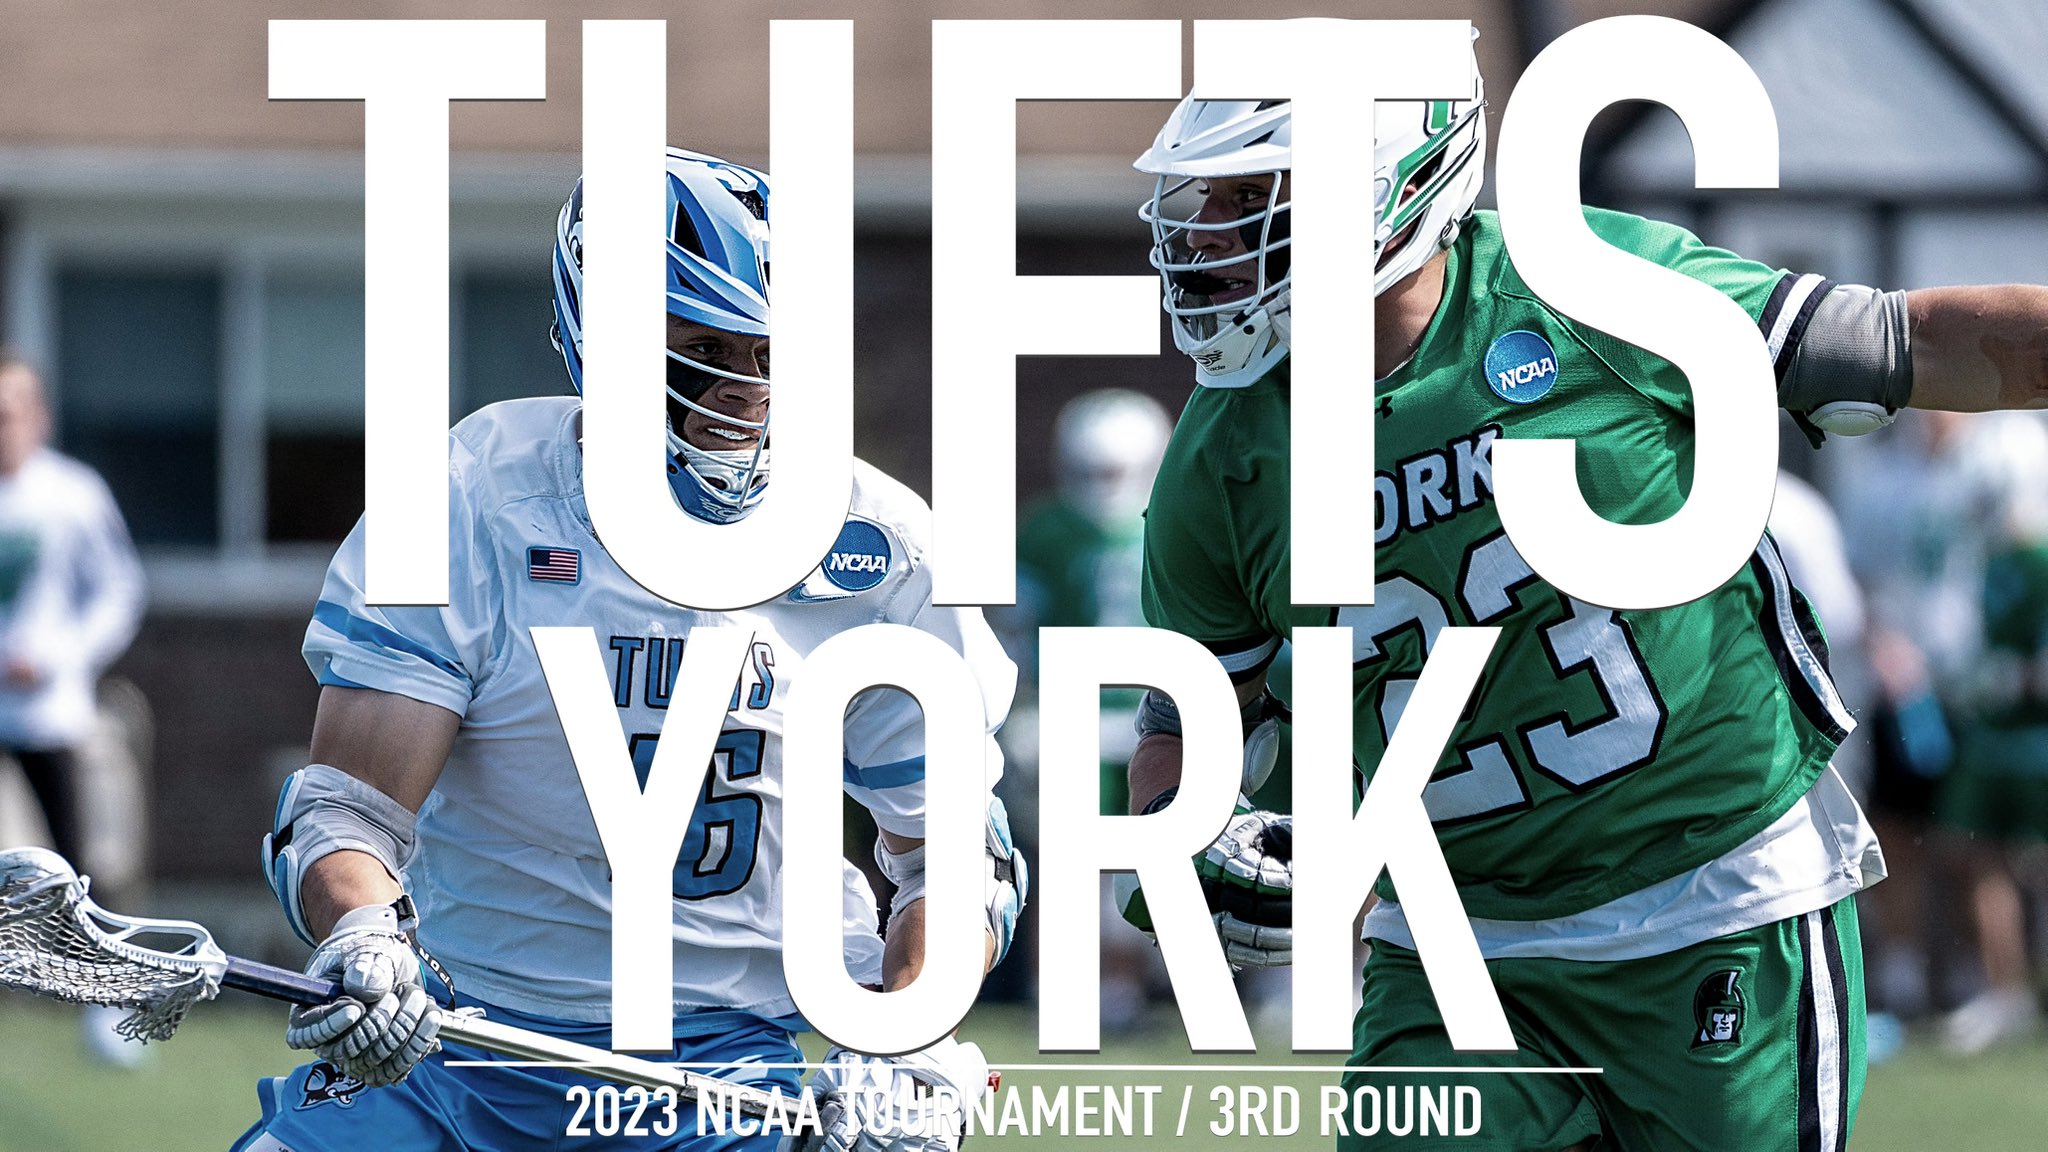 Classic Lacrosse on X: This Tufts player raises the question: How